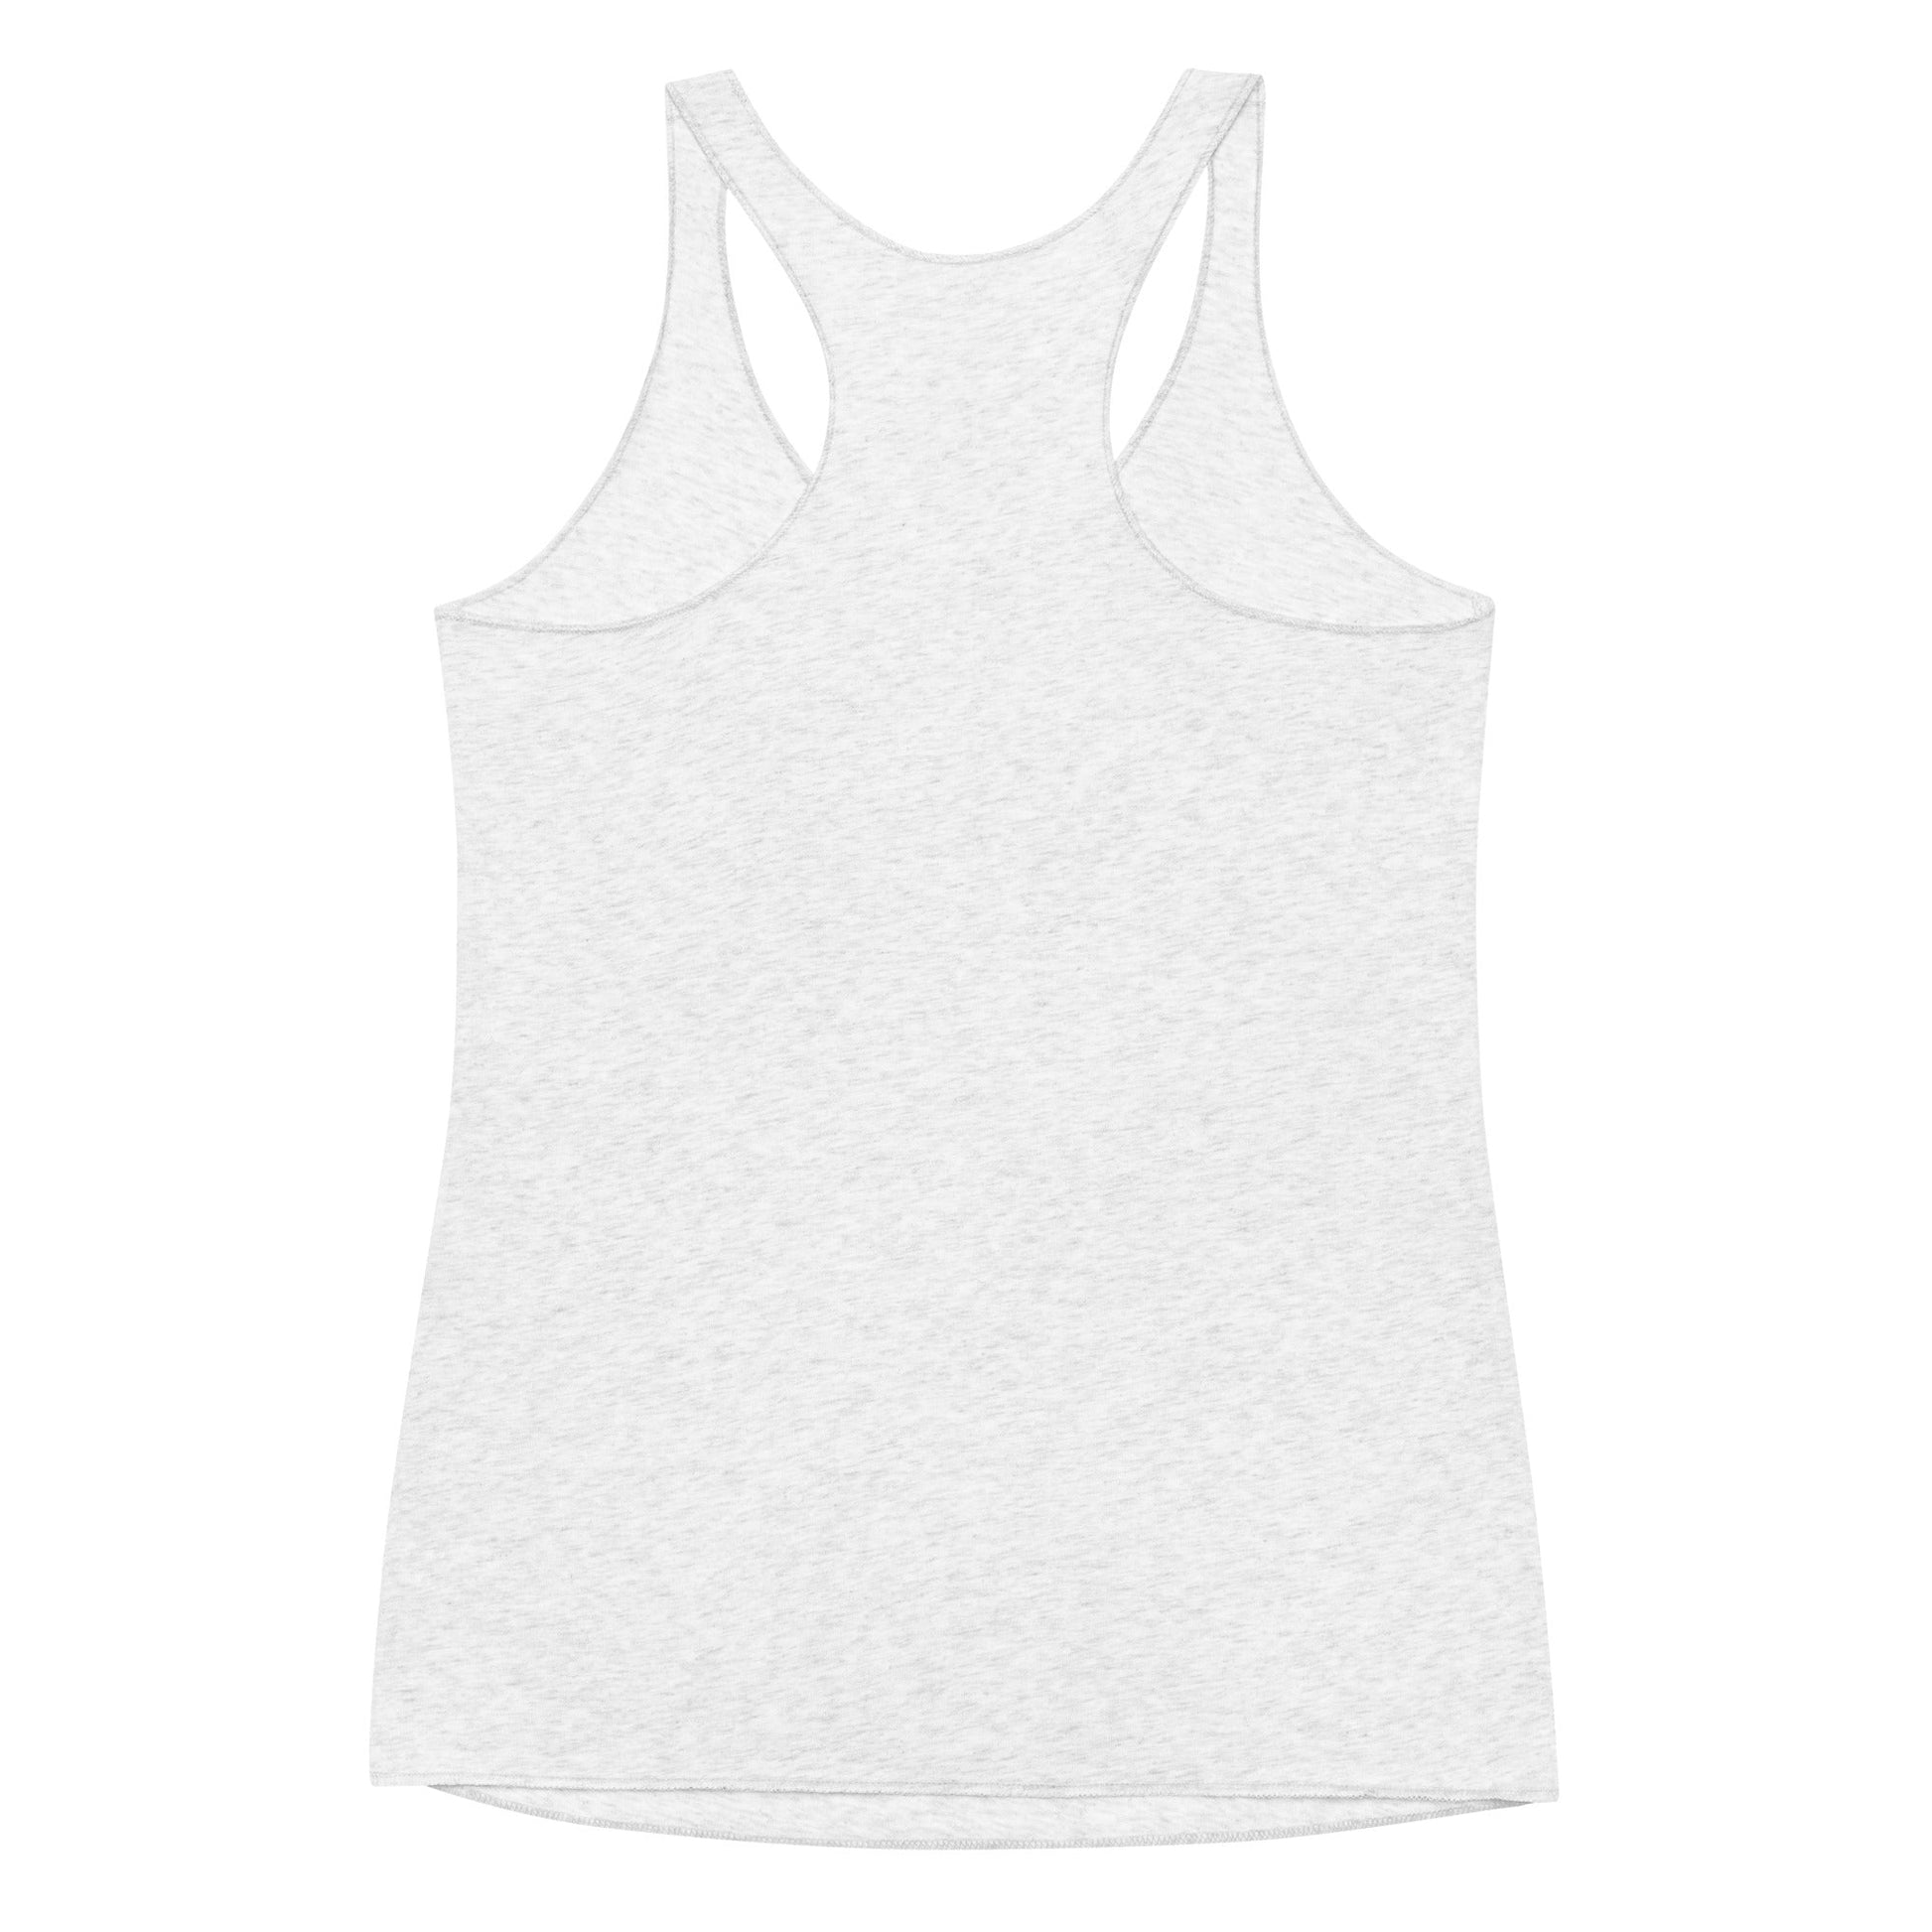 California for Kennedy Bear Women's Racerback Tank - TEAM KENNEDY. All rights reserved